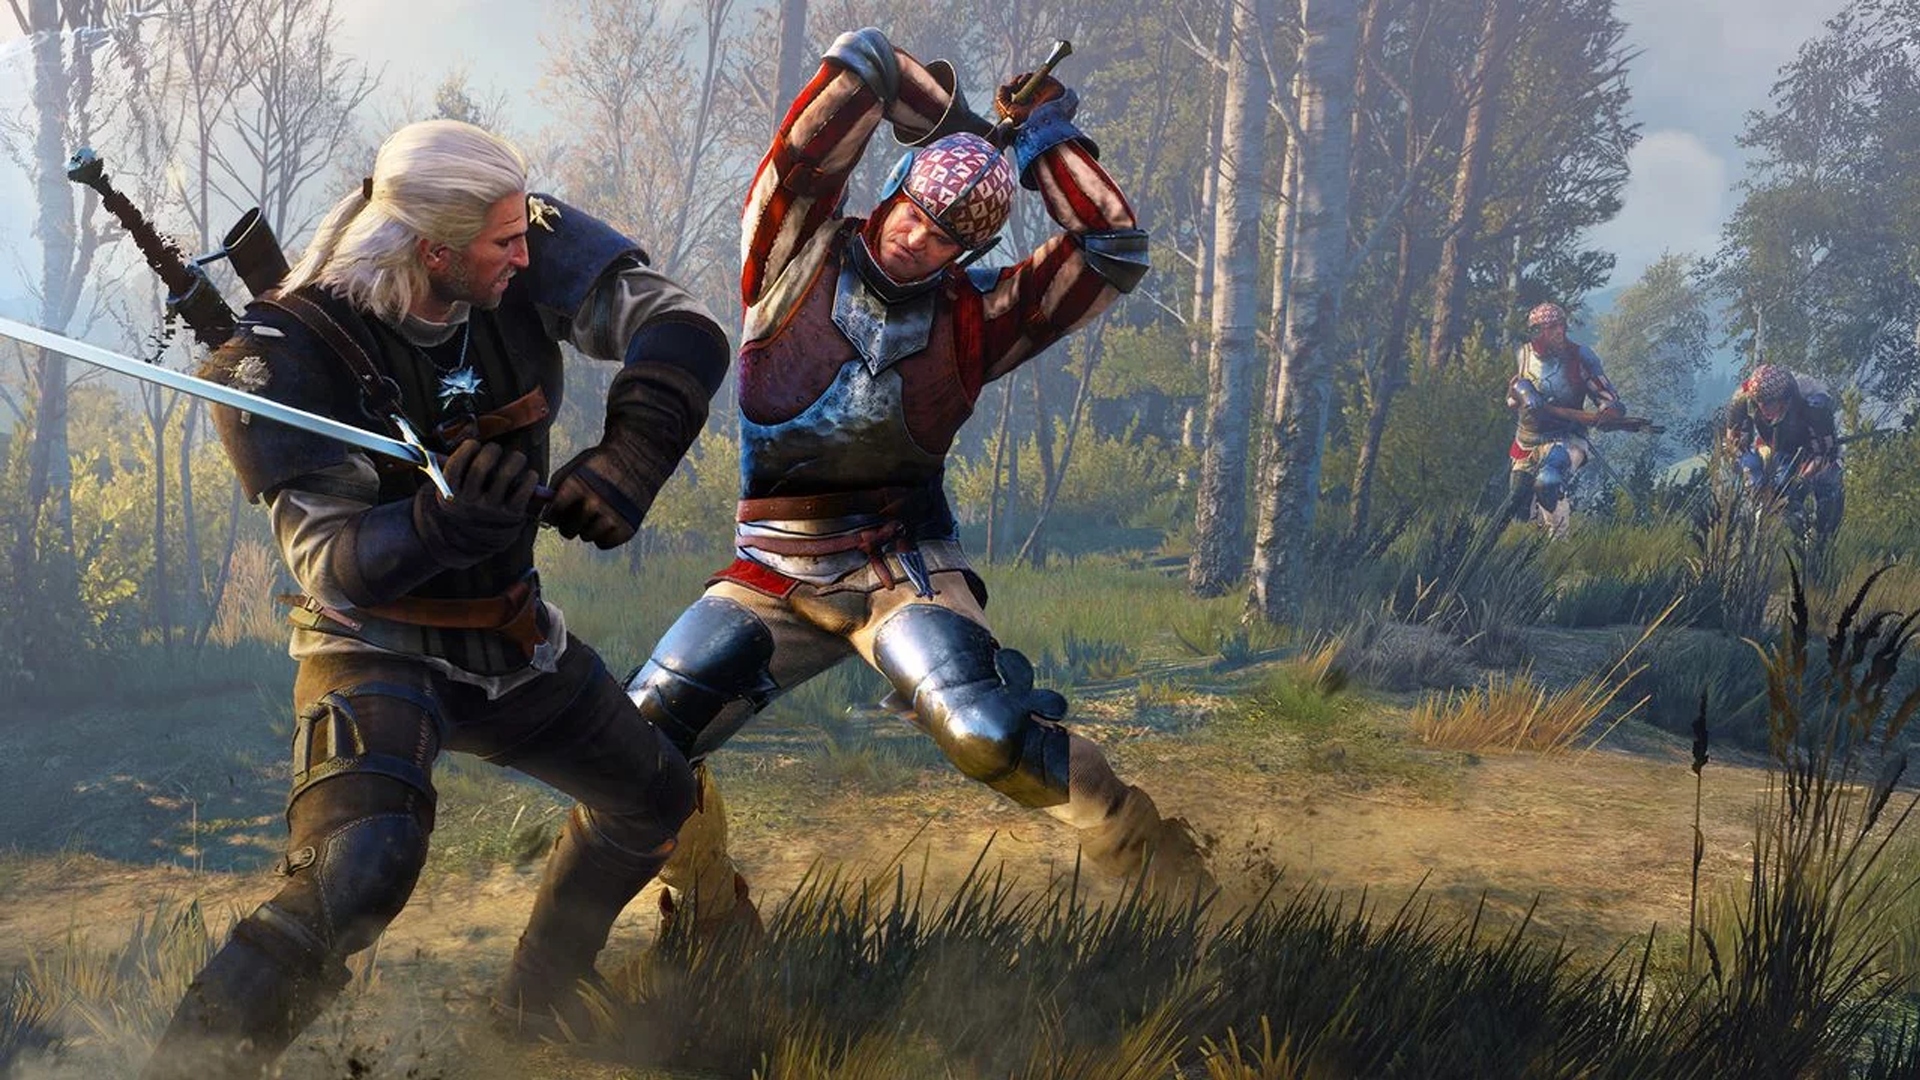 Best Game of Thrones games: The Witcher 3. Image shows Geralt in a fight with someone.